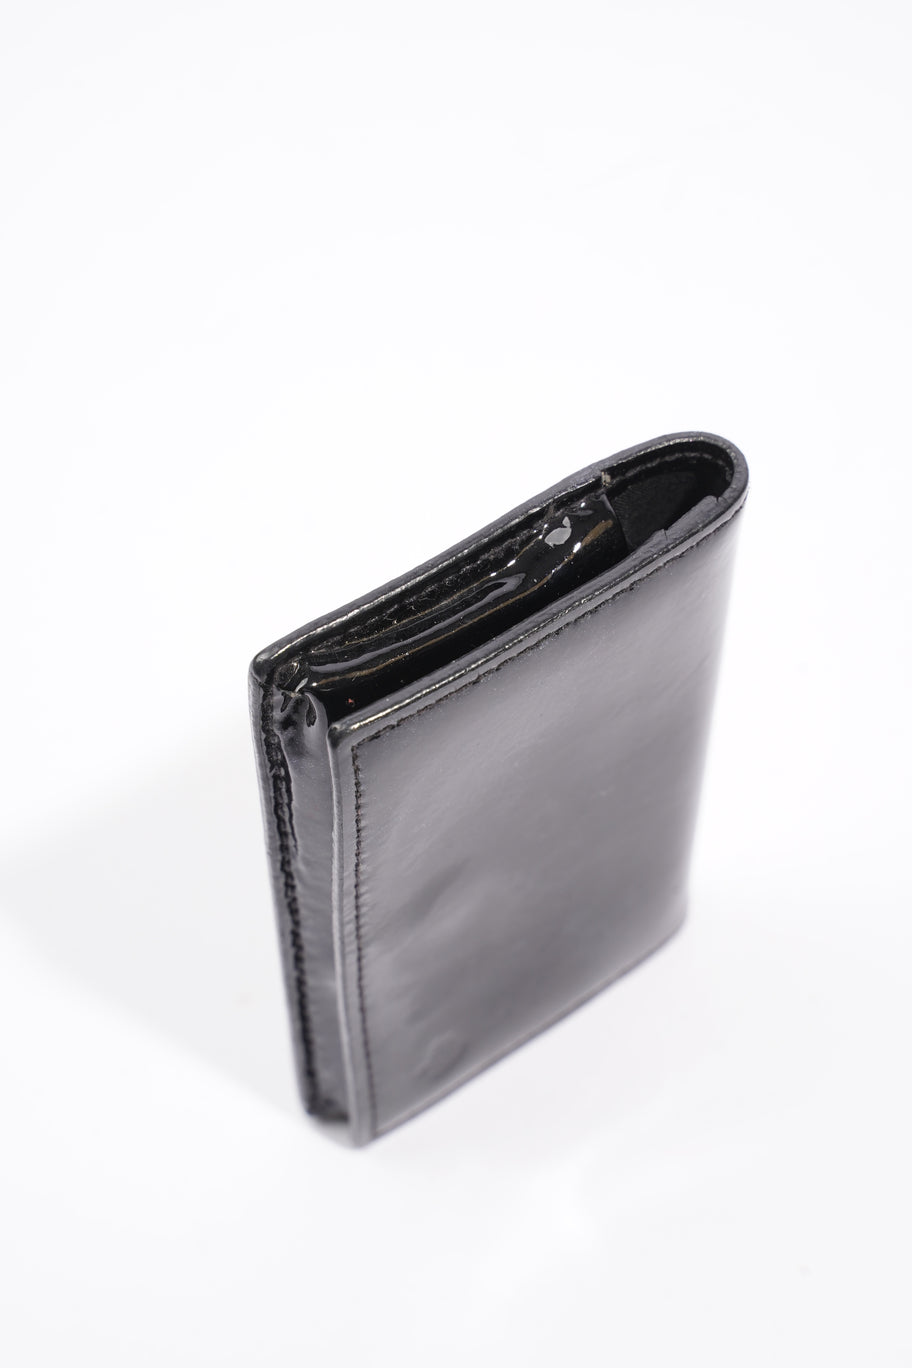 Coin Wallet Black Patent Leather Image 4